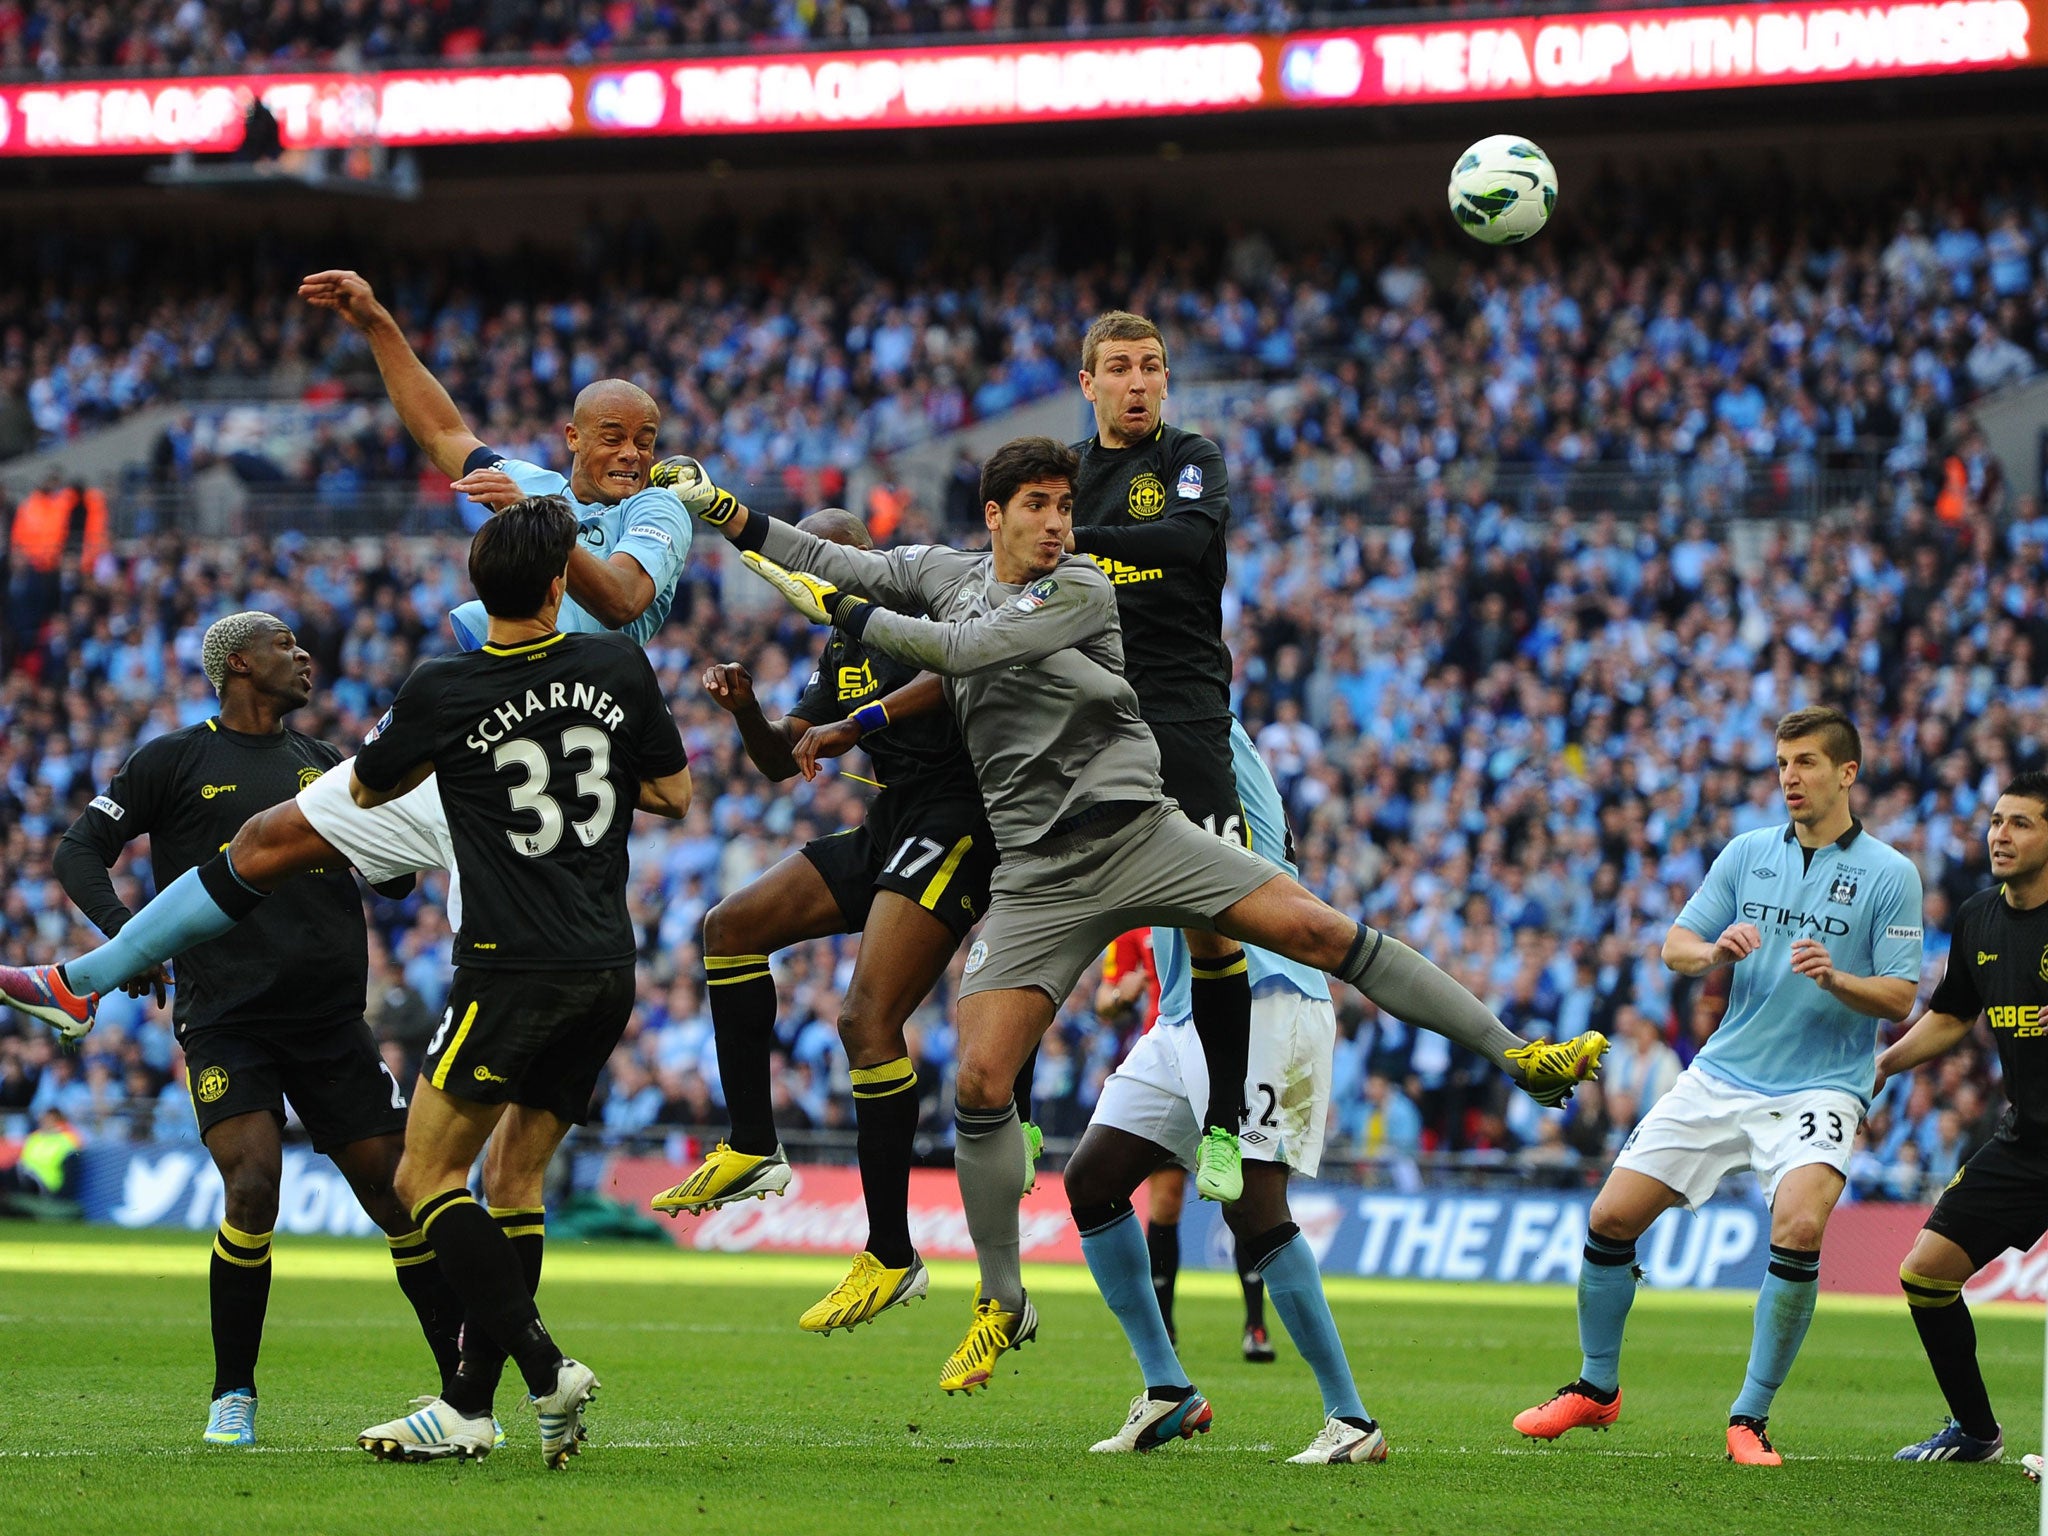 City blues: Captain Vincent Kompany heads an effort on goal, as Mancini’s day ended in disappointment